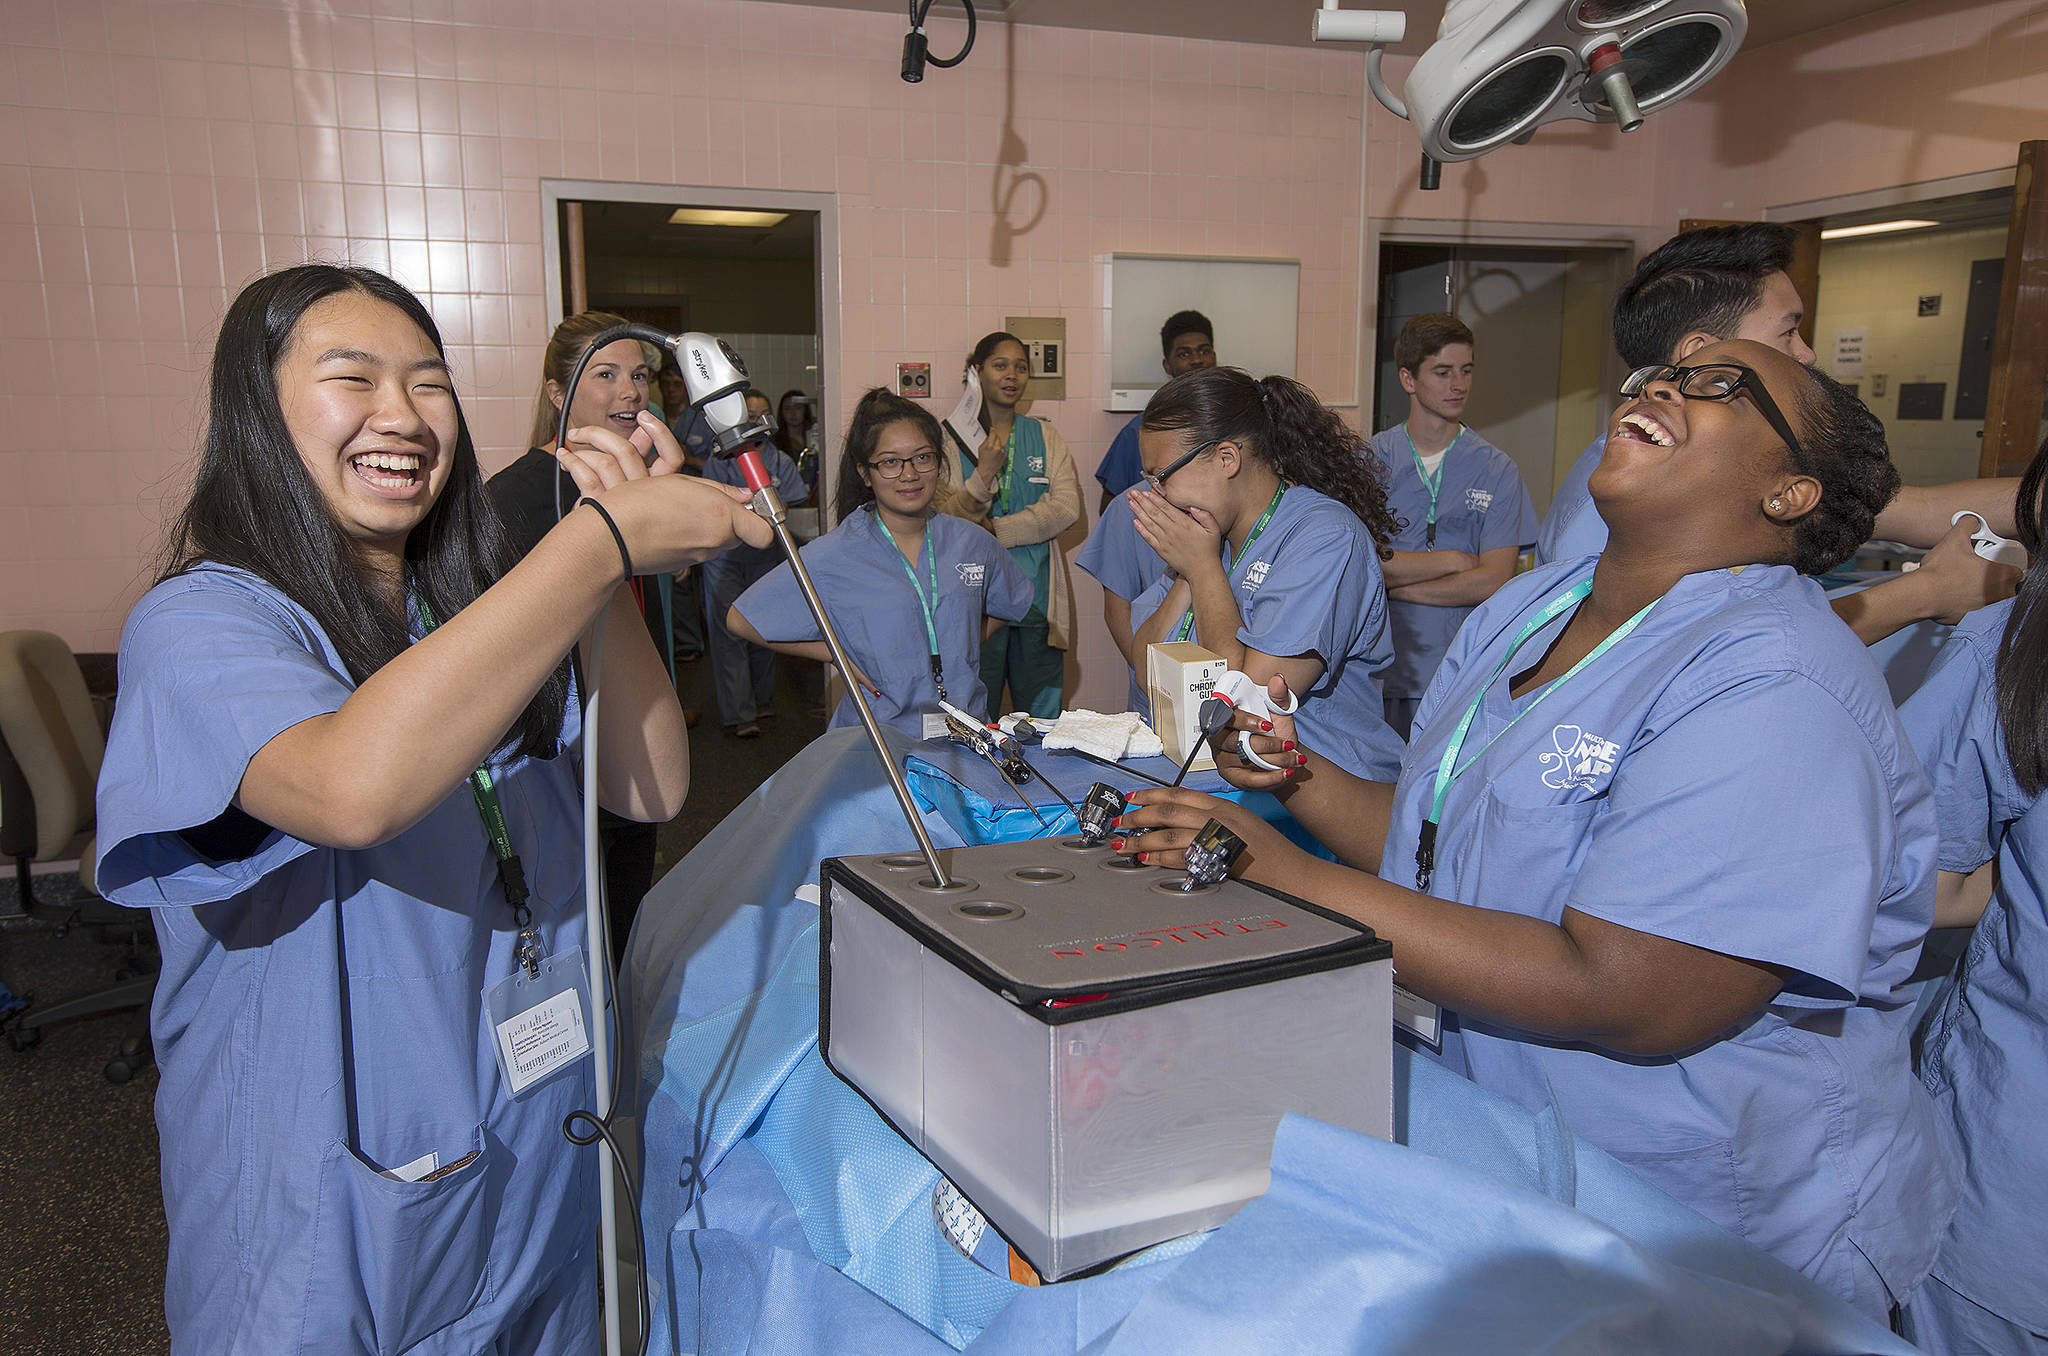 Tiffany Nguyen, 17, left, of Kent, laughs with Tiffany Jinks, 16, of Tacoma, as she attempts to grab candy with an alligator clamp while learning about laparoscopic surgery last week during Nurse Camp at Tacoma General Hospital. Photo by Patrick Hagerty